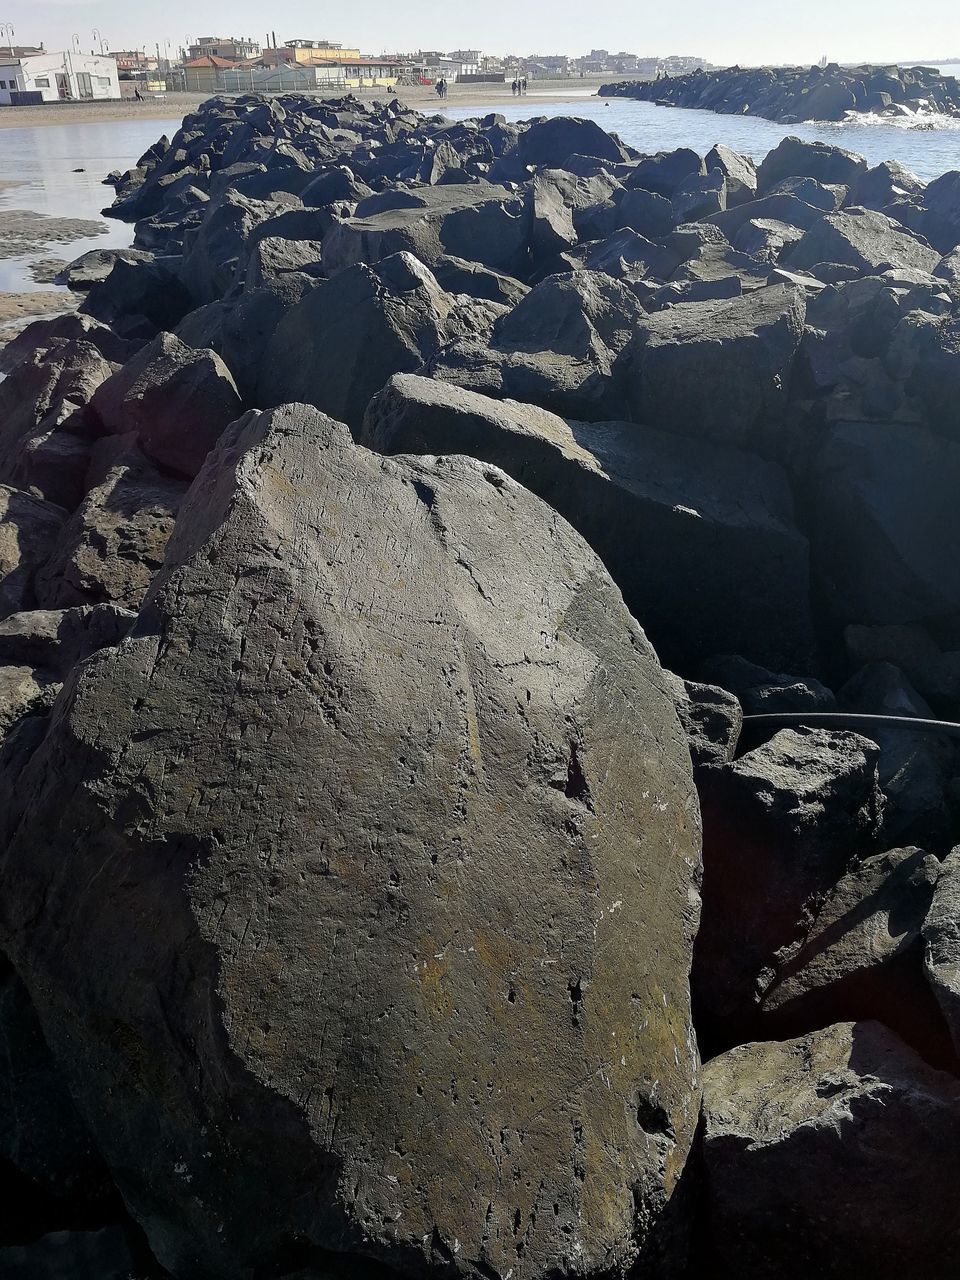 AERIAL VIEW OF ROCK FORMATION ON BEACH